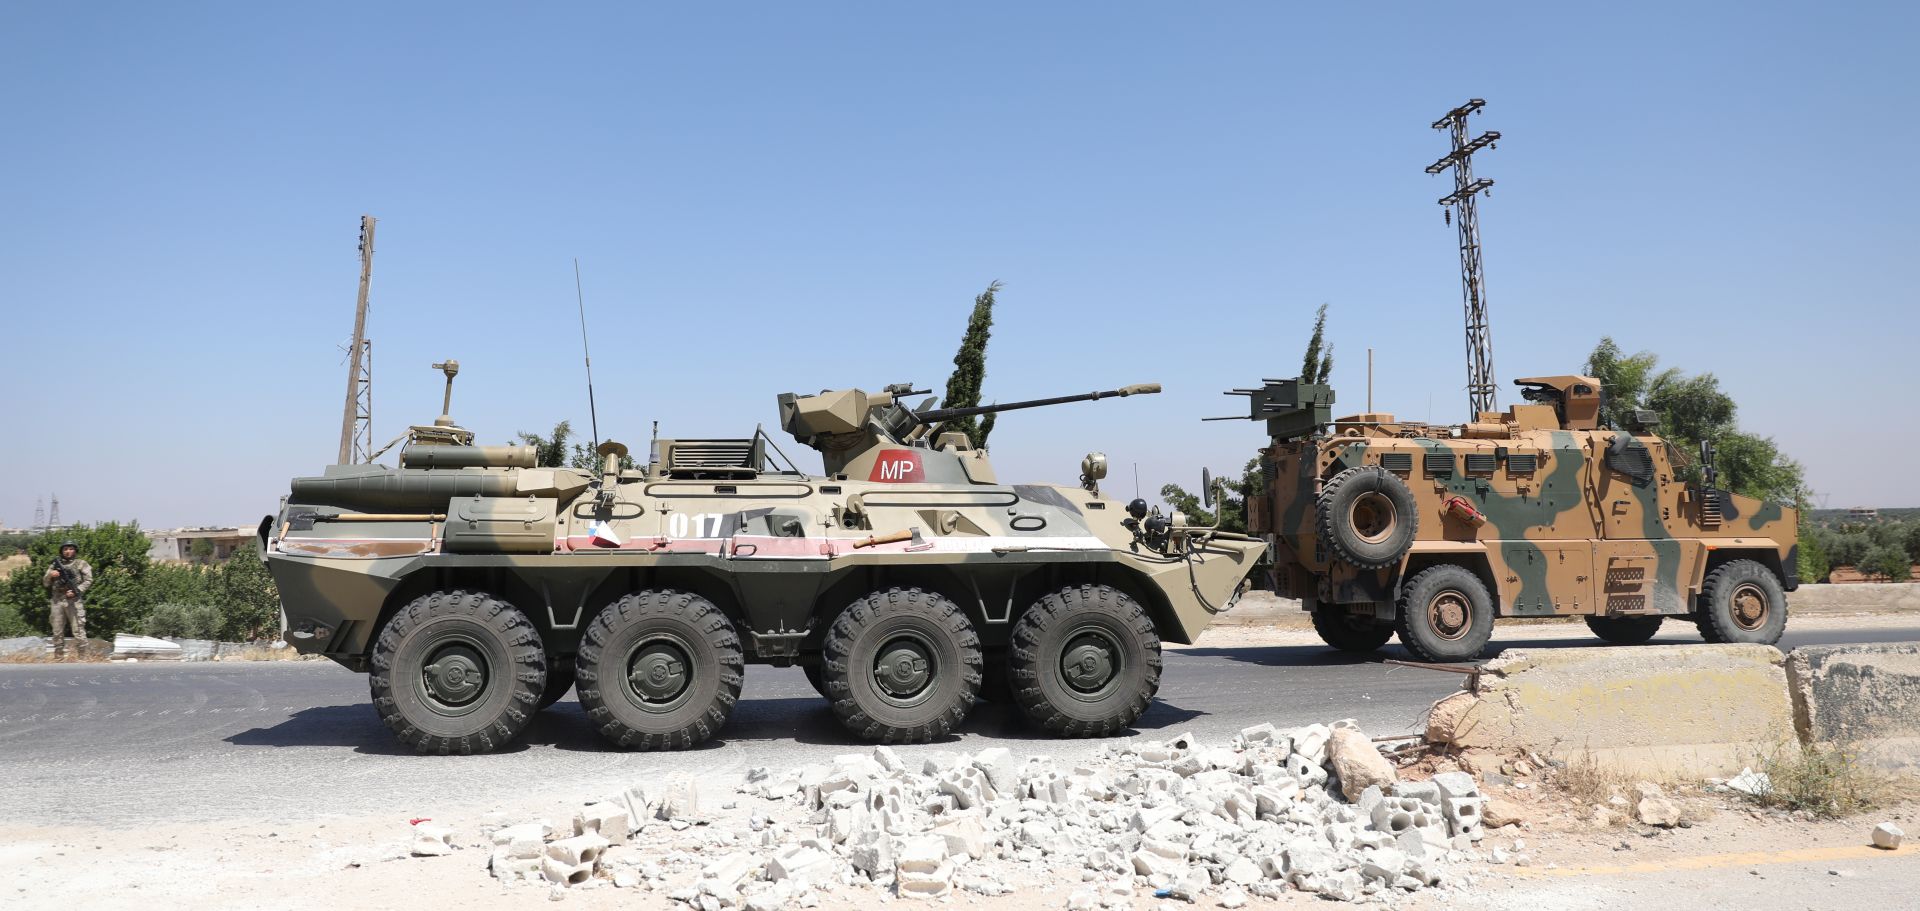 epa08520486 Tanks of the Russian-Turkish joint Military patrol No. 19 drive on the M4 road linking Tranbah village to the Town of Jisr Al-Shughour, in The outskirts of Ariha south of Idlib, Syria, 01 July 2020. The EU and the UN co-chaired, on 30 June, the fourth Brussels Conference to seek a political solution to the Syria conflict, raise financial support for Syria and the countries in the region that host Syrian refugees.  EPA/YAHYA NEMAH